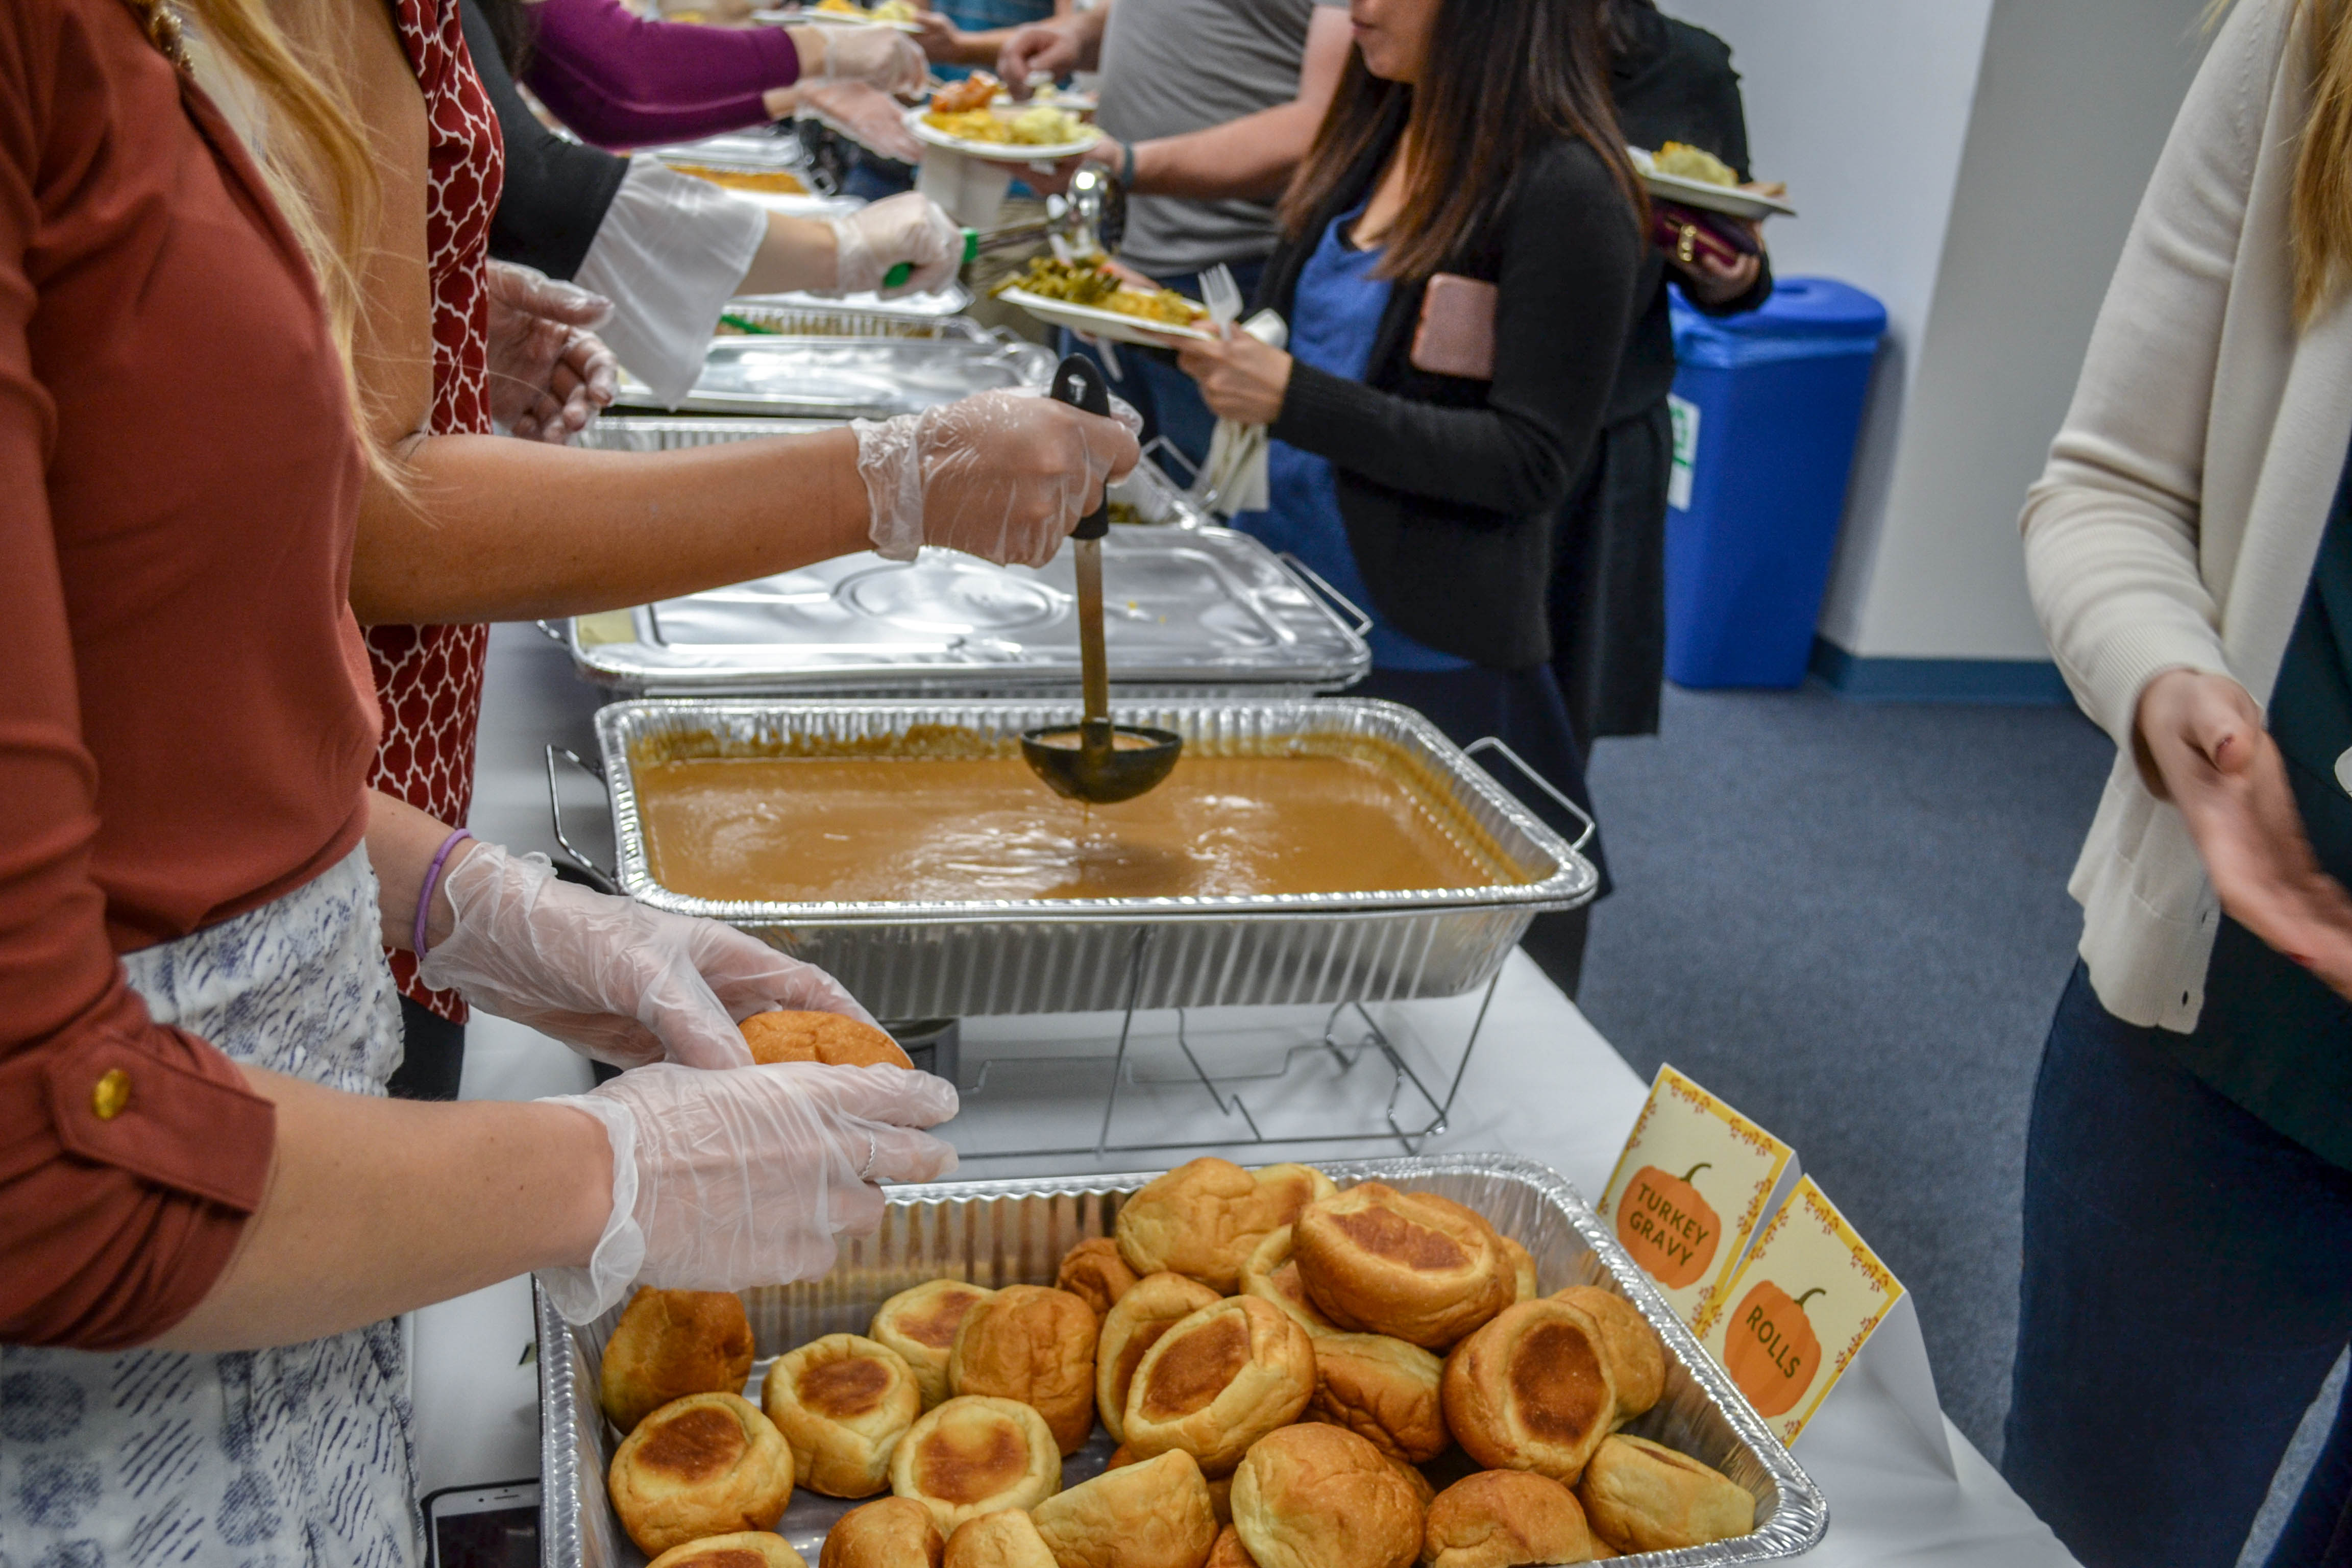 Our community enjoy traditional American cuisine at the 2018 DLS Thanksgiving celebration